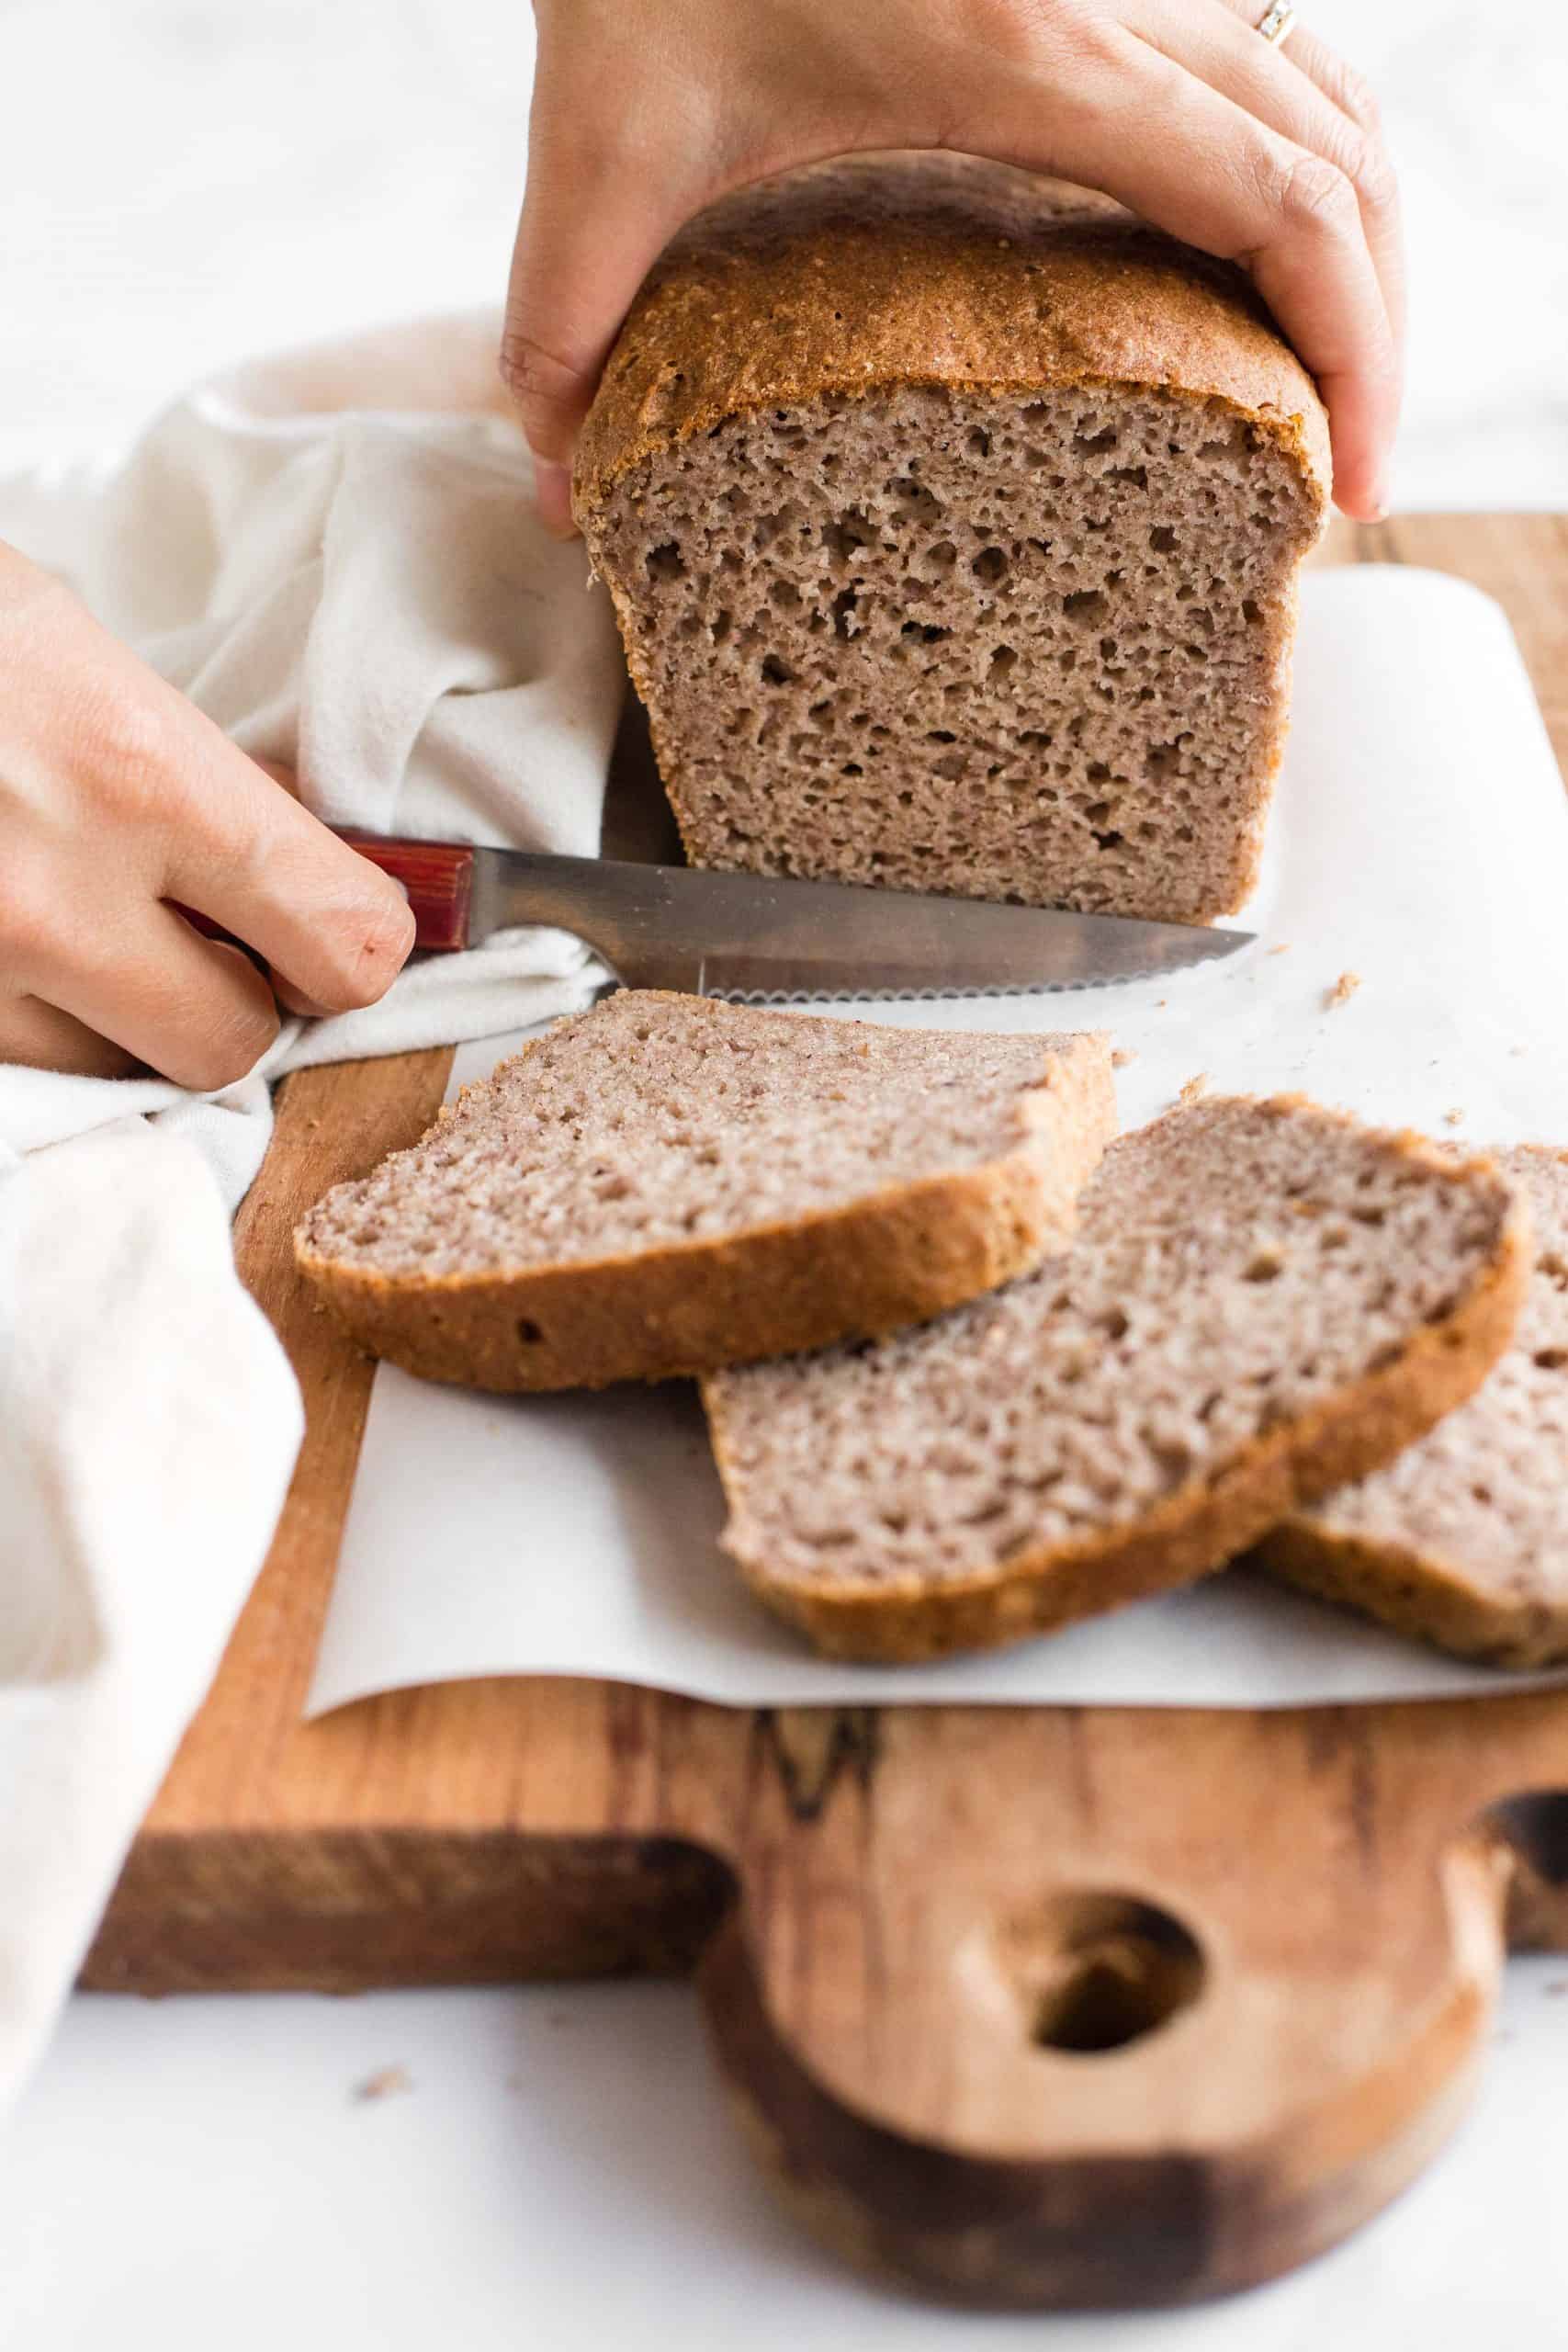 Slicing into a loaf of brown bread.